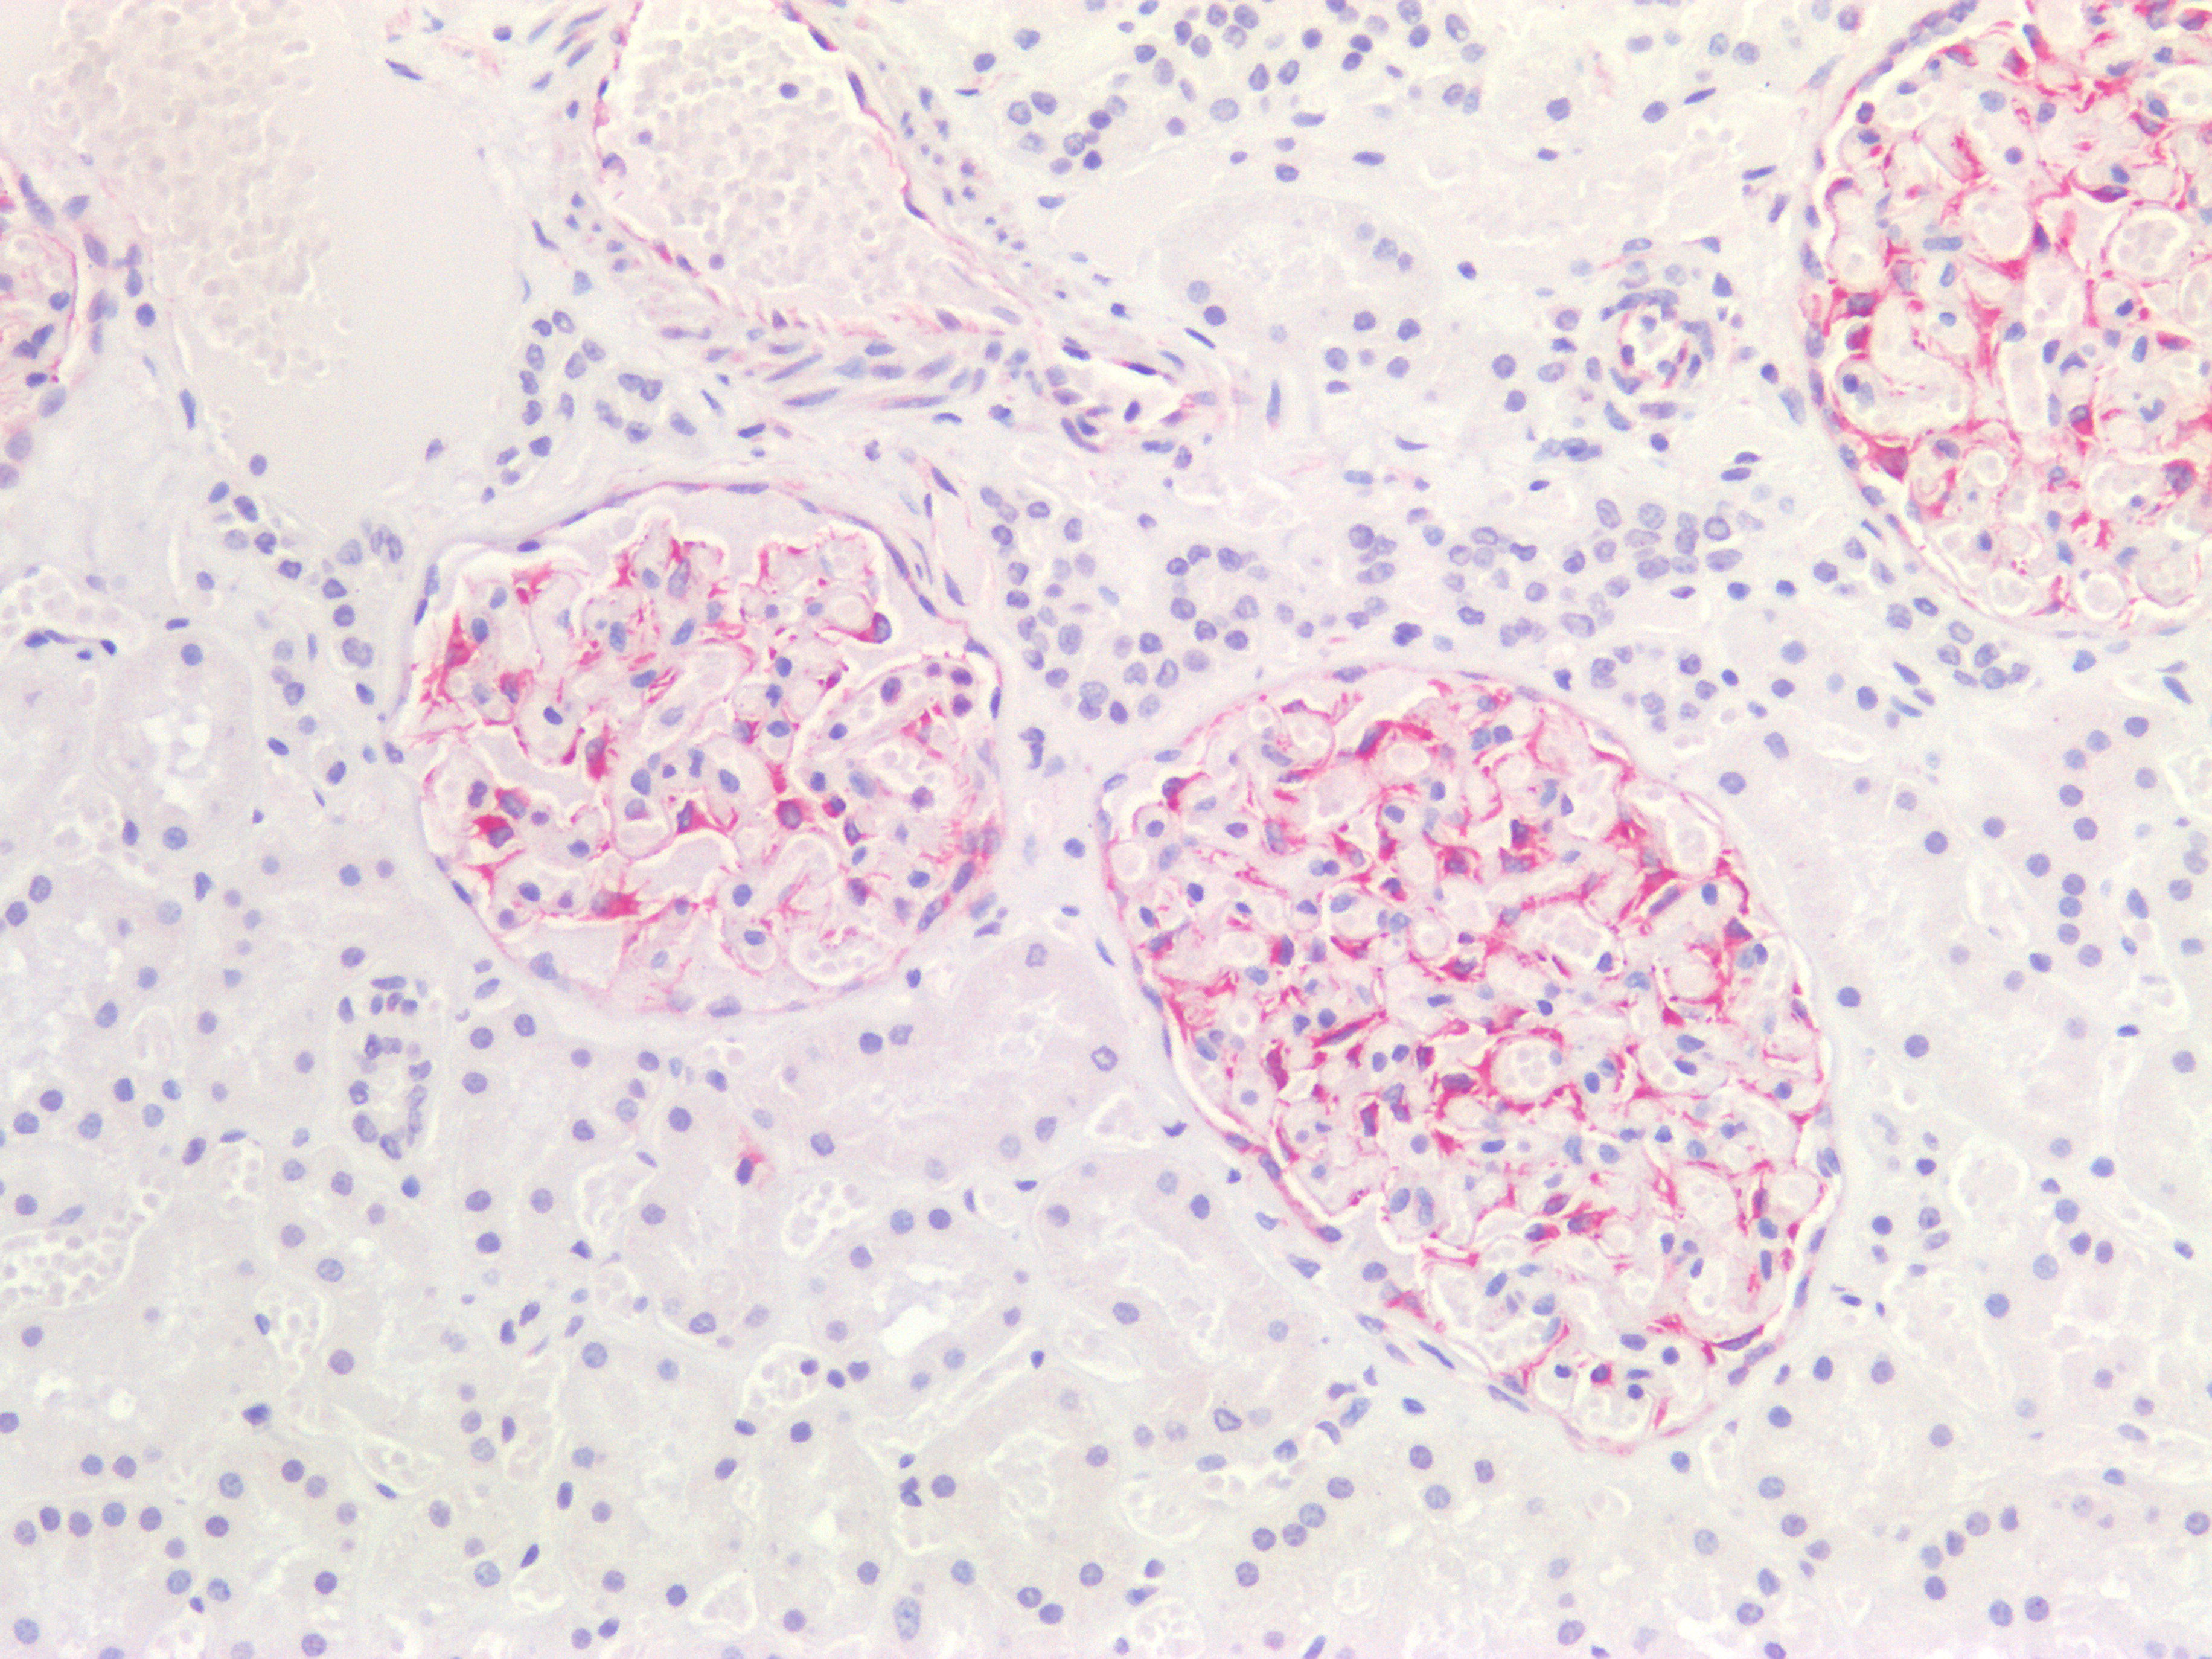 Figure 7. Immunostaining of human paraffin embedded tissue sections of human kidney with MUB1904P (diluted 1:200), showing the specific pattern of vimentin in the mesenchymal cell types, such as fibroblasts in the connective tissue, and podocytes.  As expected, no reactivity is seen in the epithelial cell compartment.